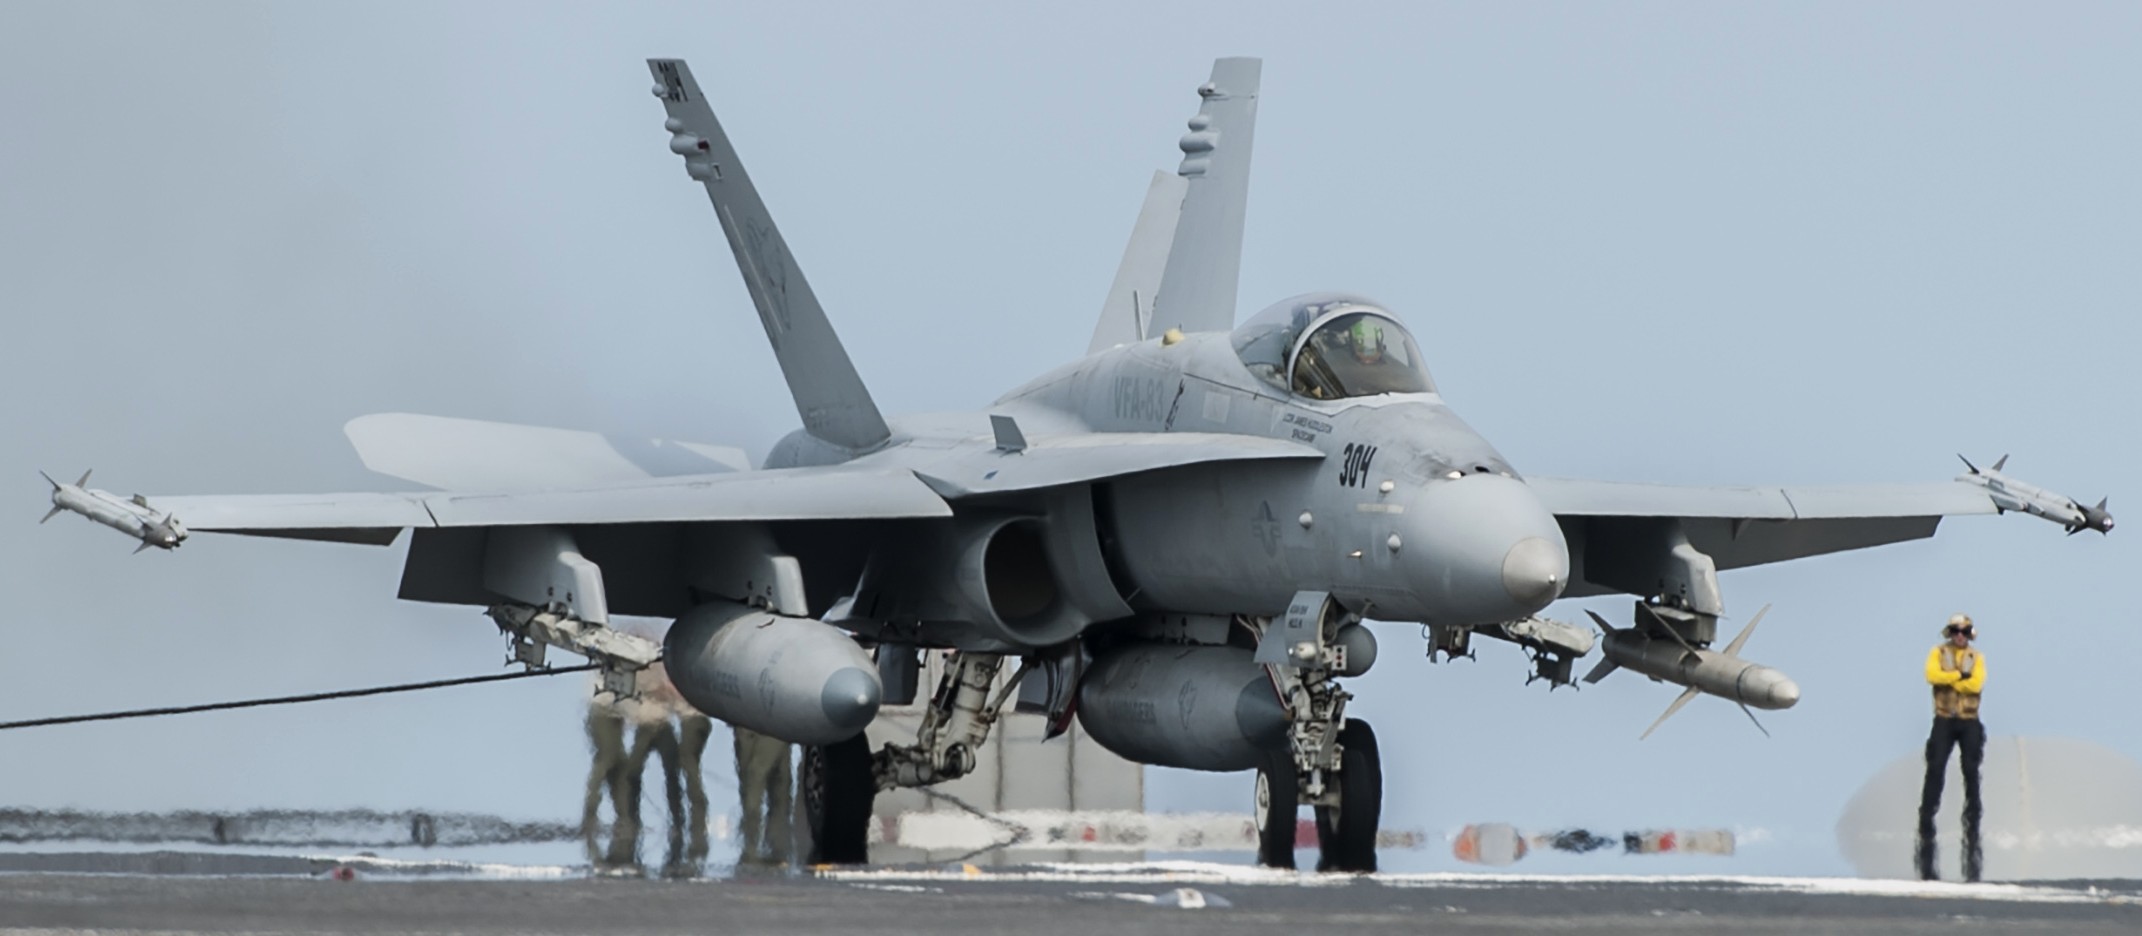 vfa-83 rampagers strike fighter squadron f/a-18c hornet cvw-7 uss harry s. truman cvn-75 29